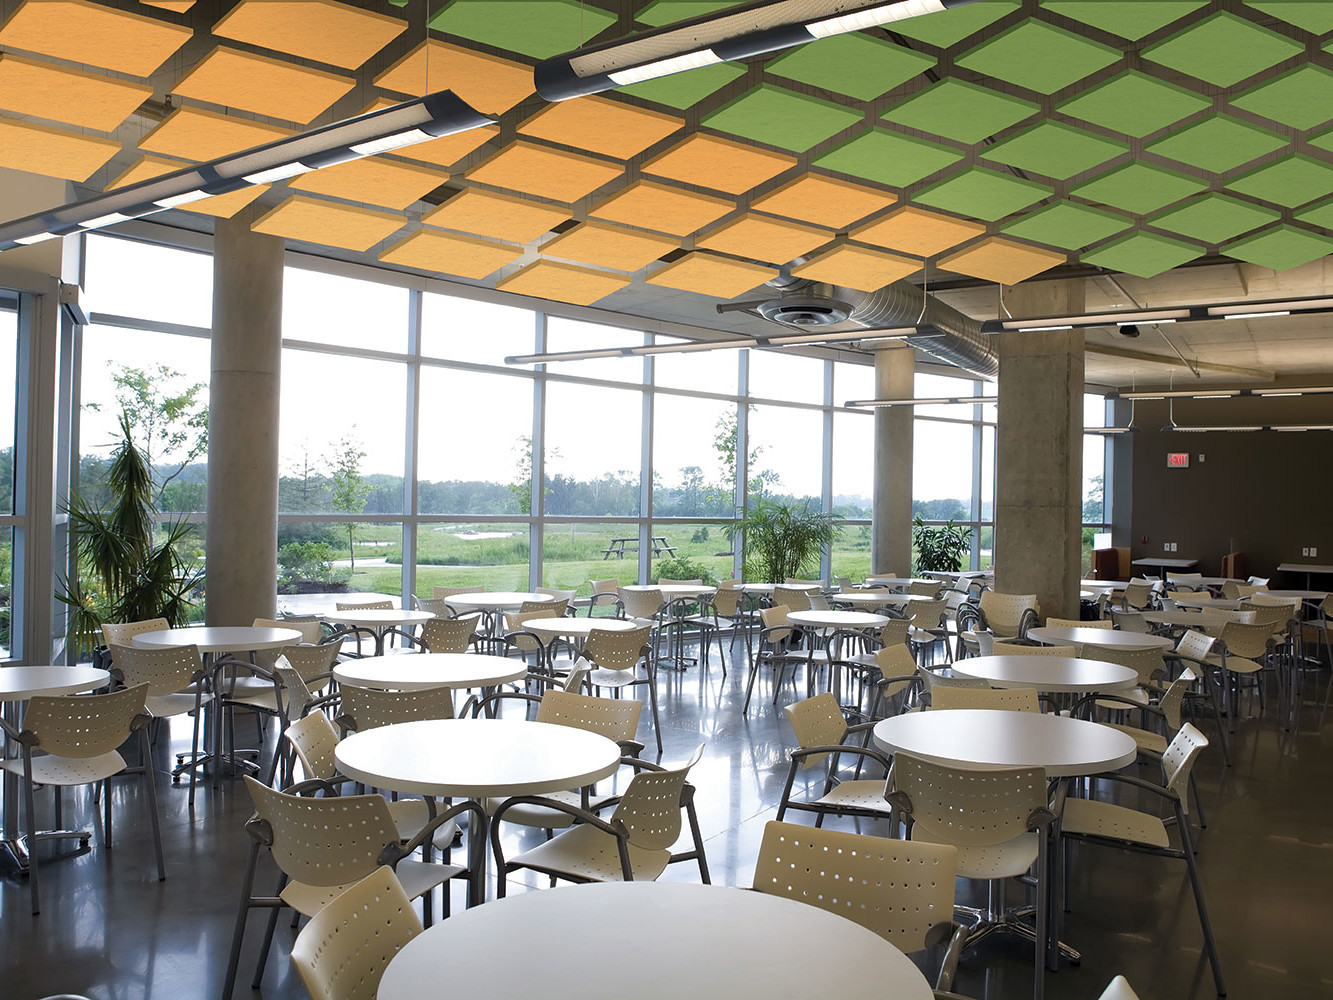 cafeteria, ceiling, clouds